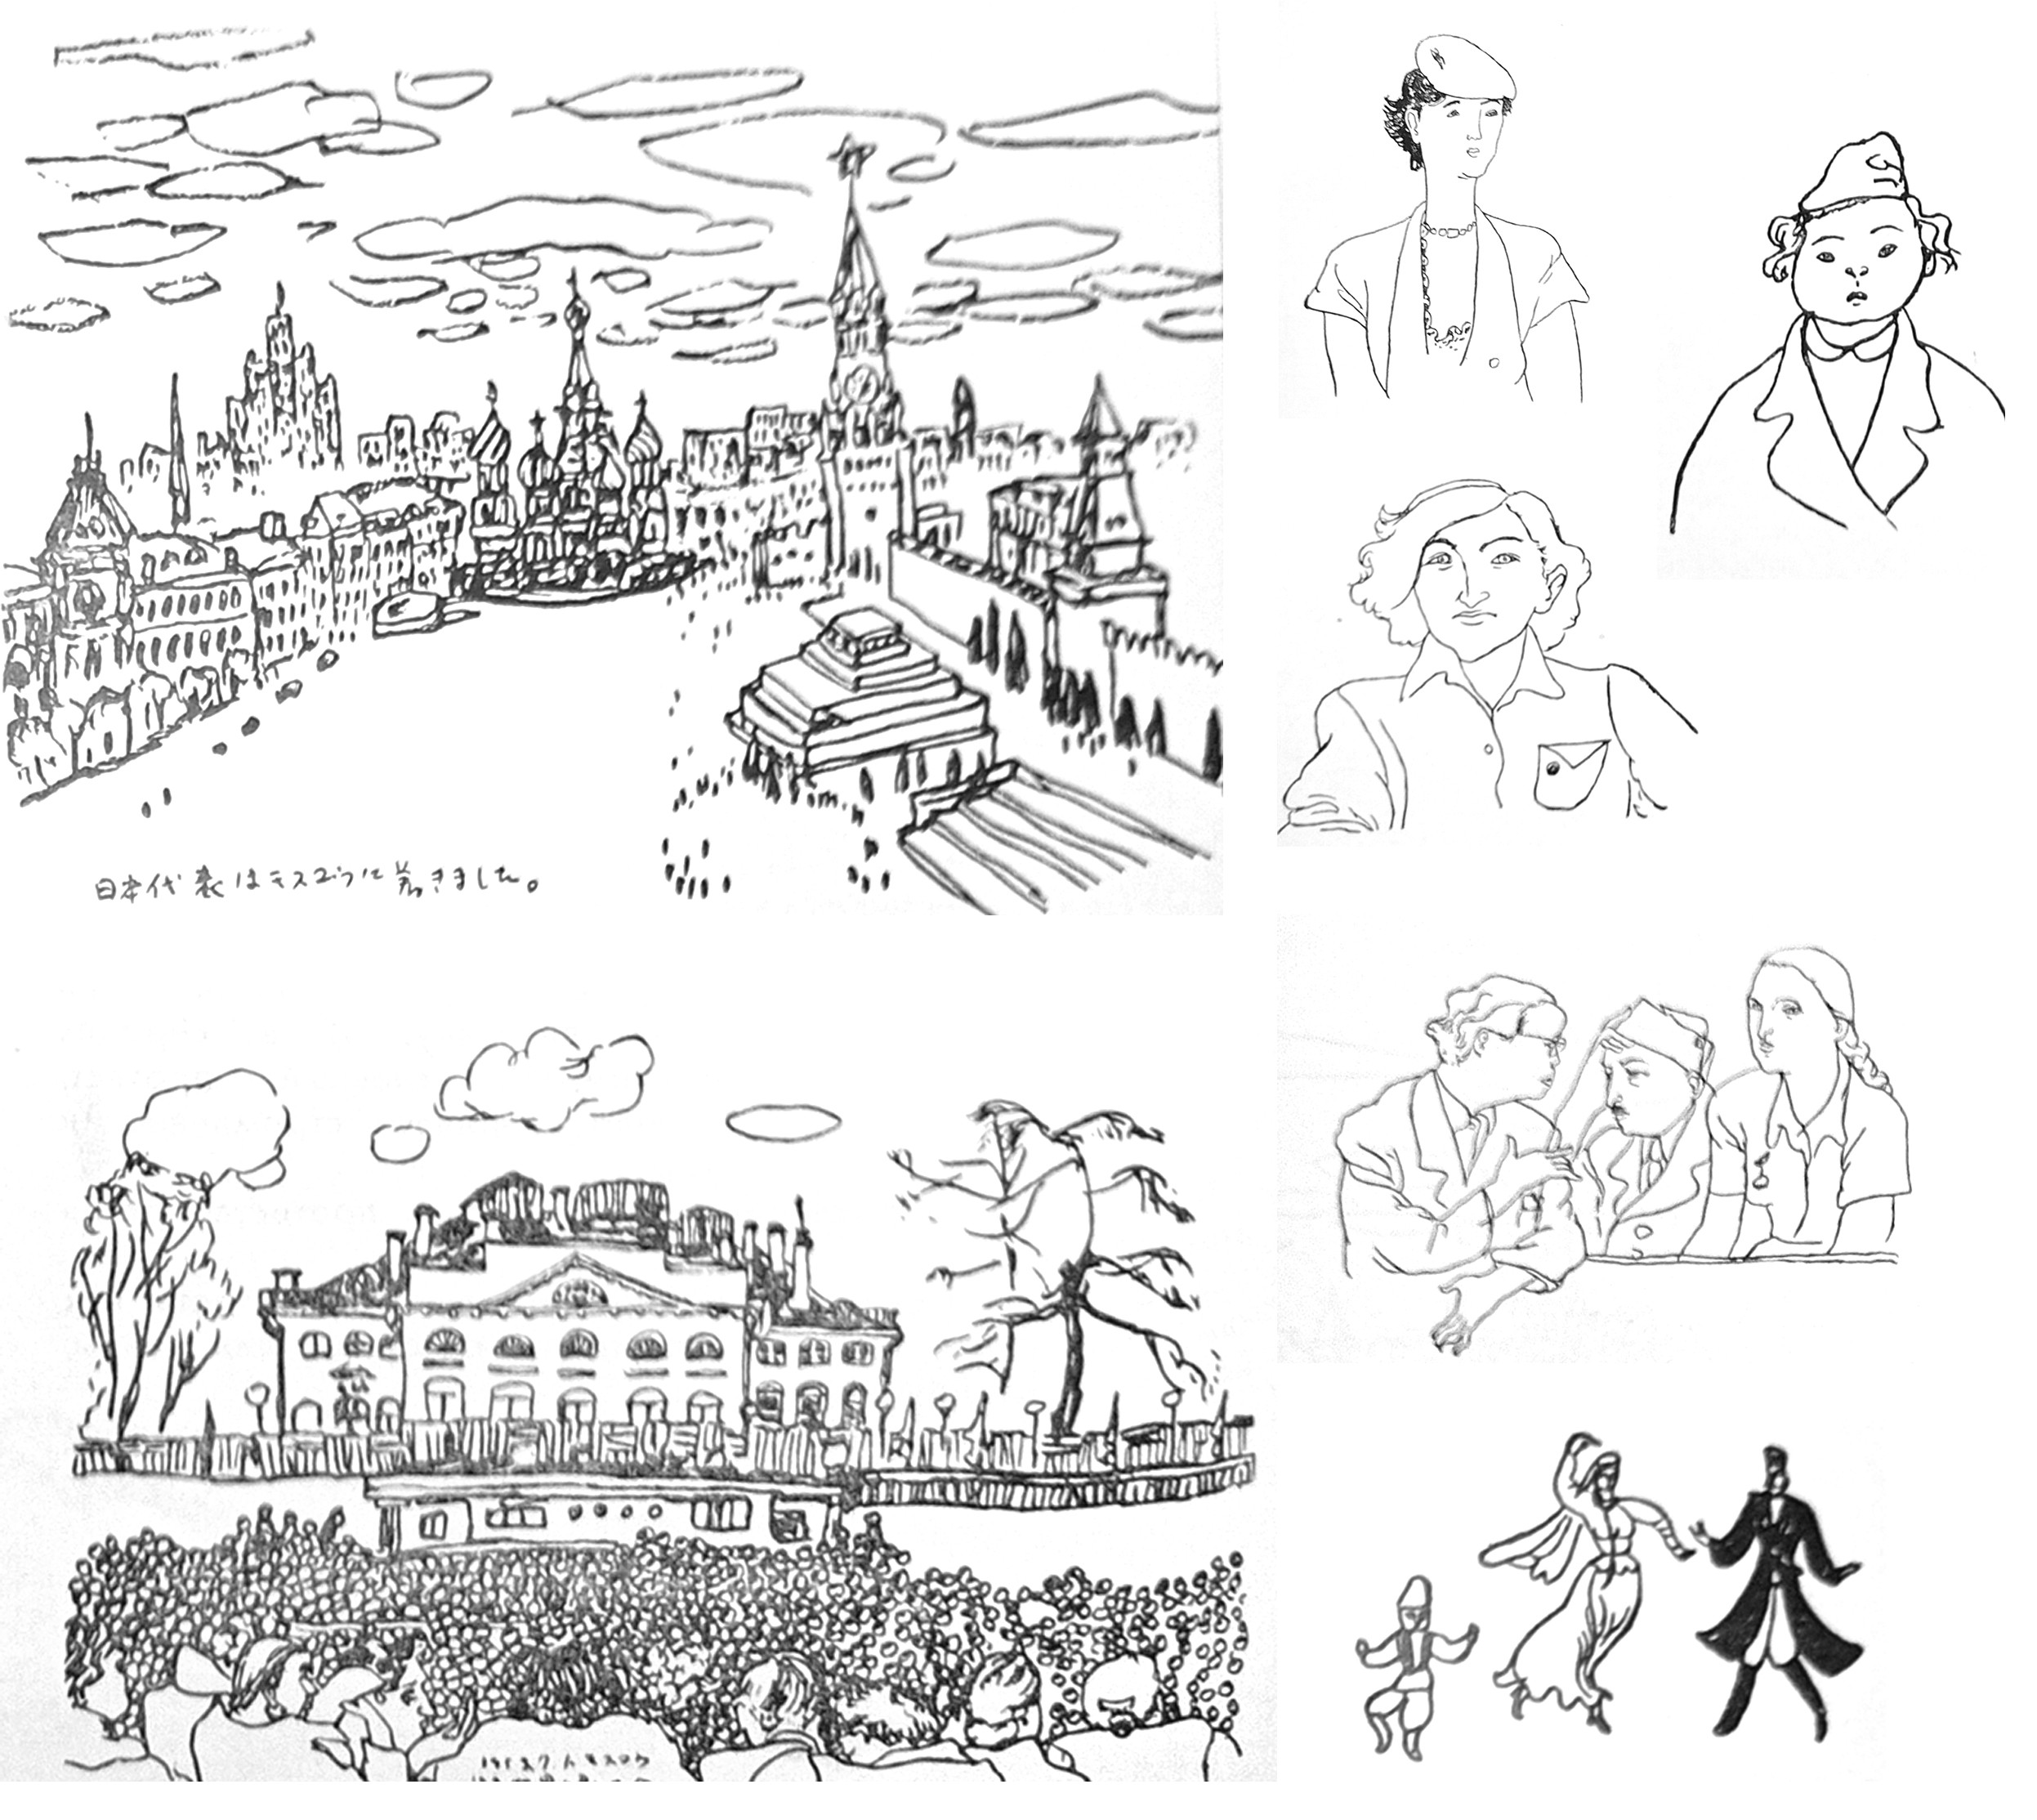 7. Sketches of Maruki Toshi from travelling around the USSR. Source: "Soviet Woman" magazine. 1953. No 6. pp. 45-47.